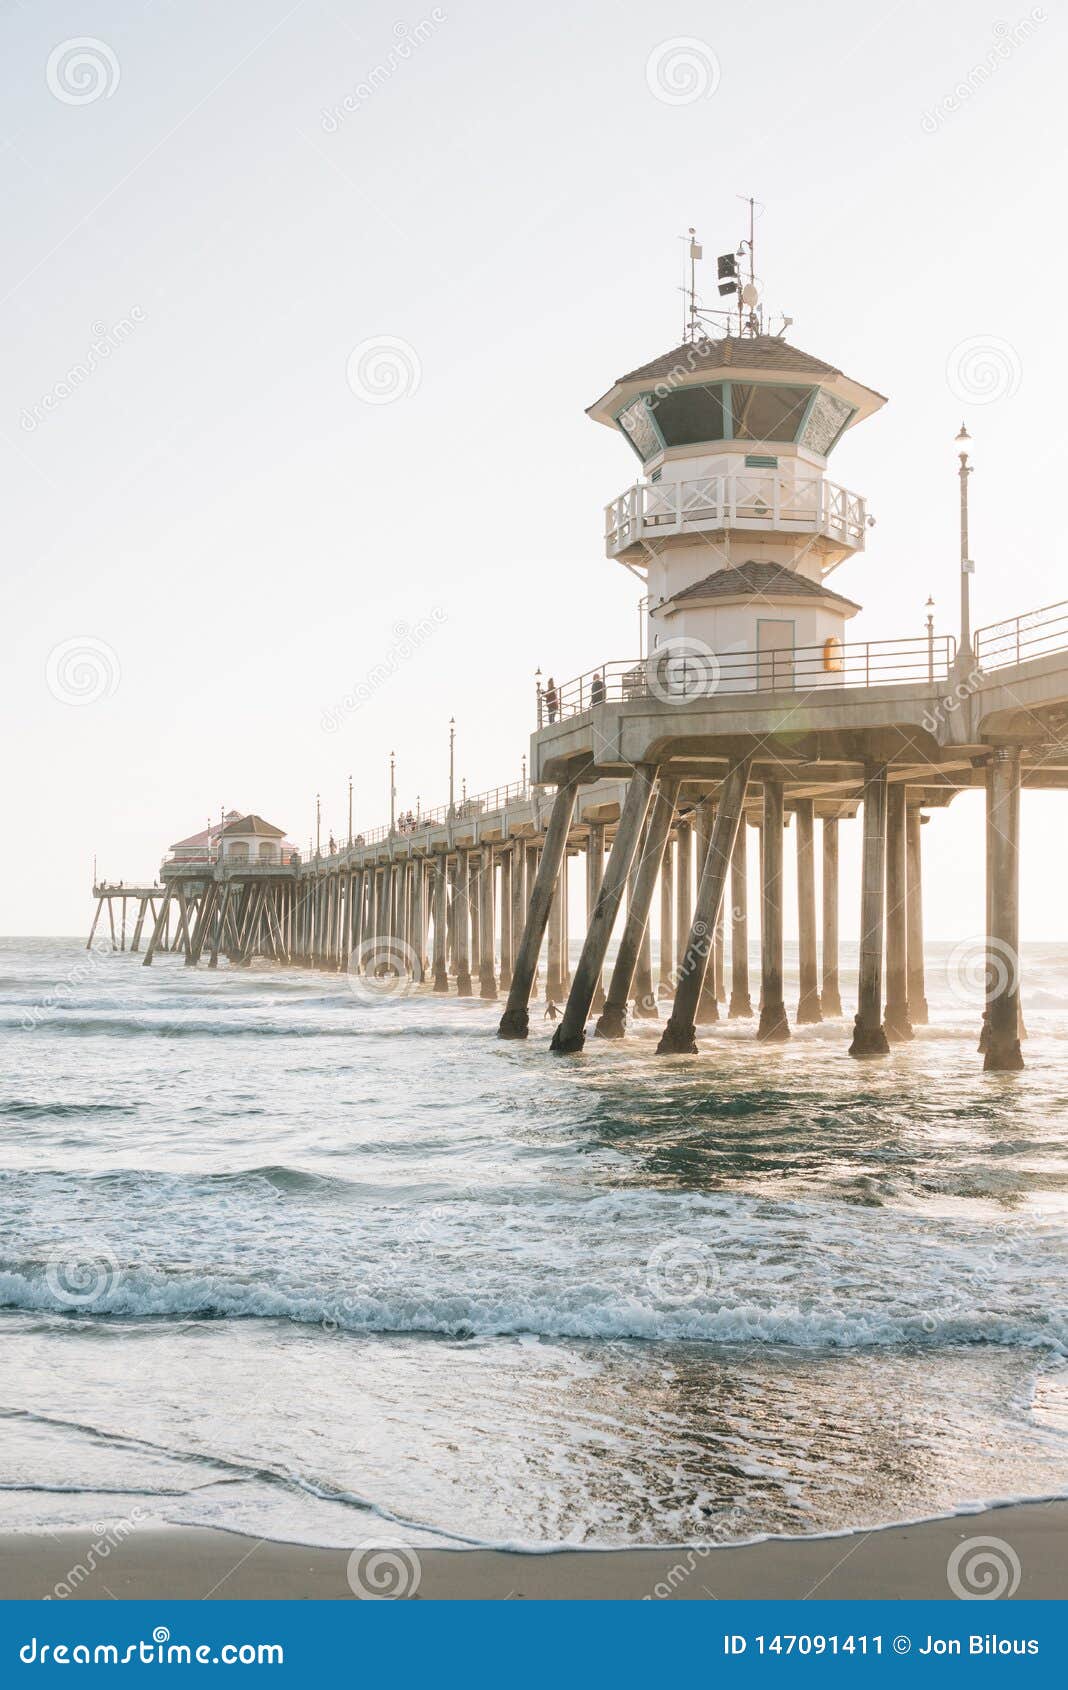 waves in the pacific ocean and the pier in huntington beach, orange county, california